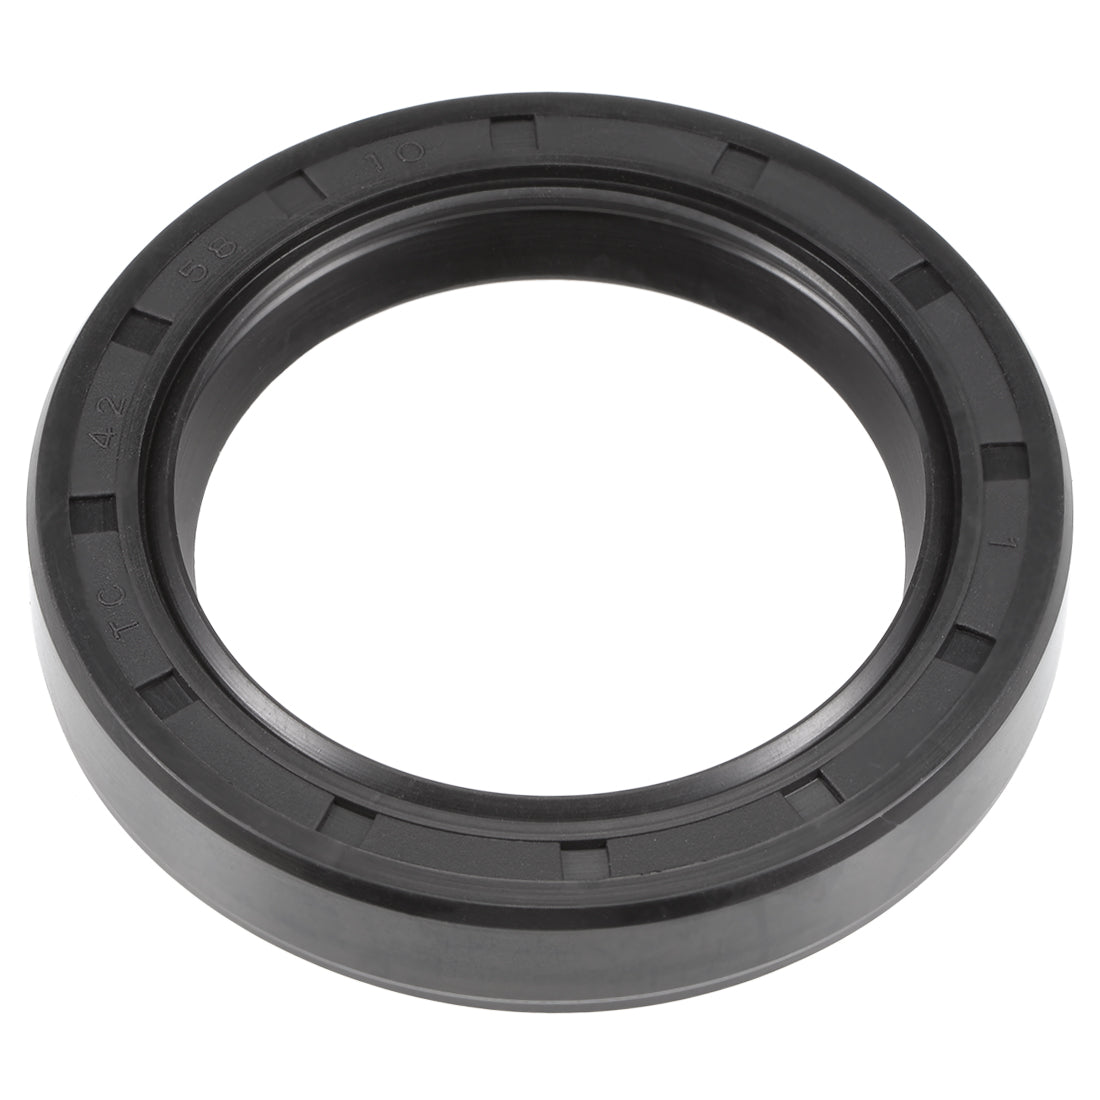 uxcell Uxcell Oil Seal, TC 42mm x 58mm x 10mm, Nitrile Rubber Cover Double Lip